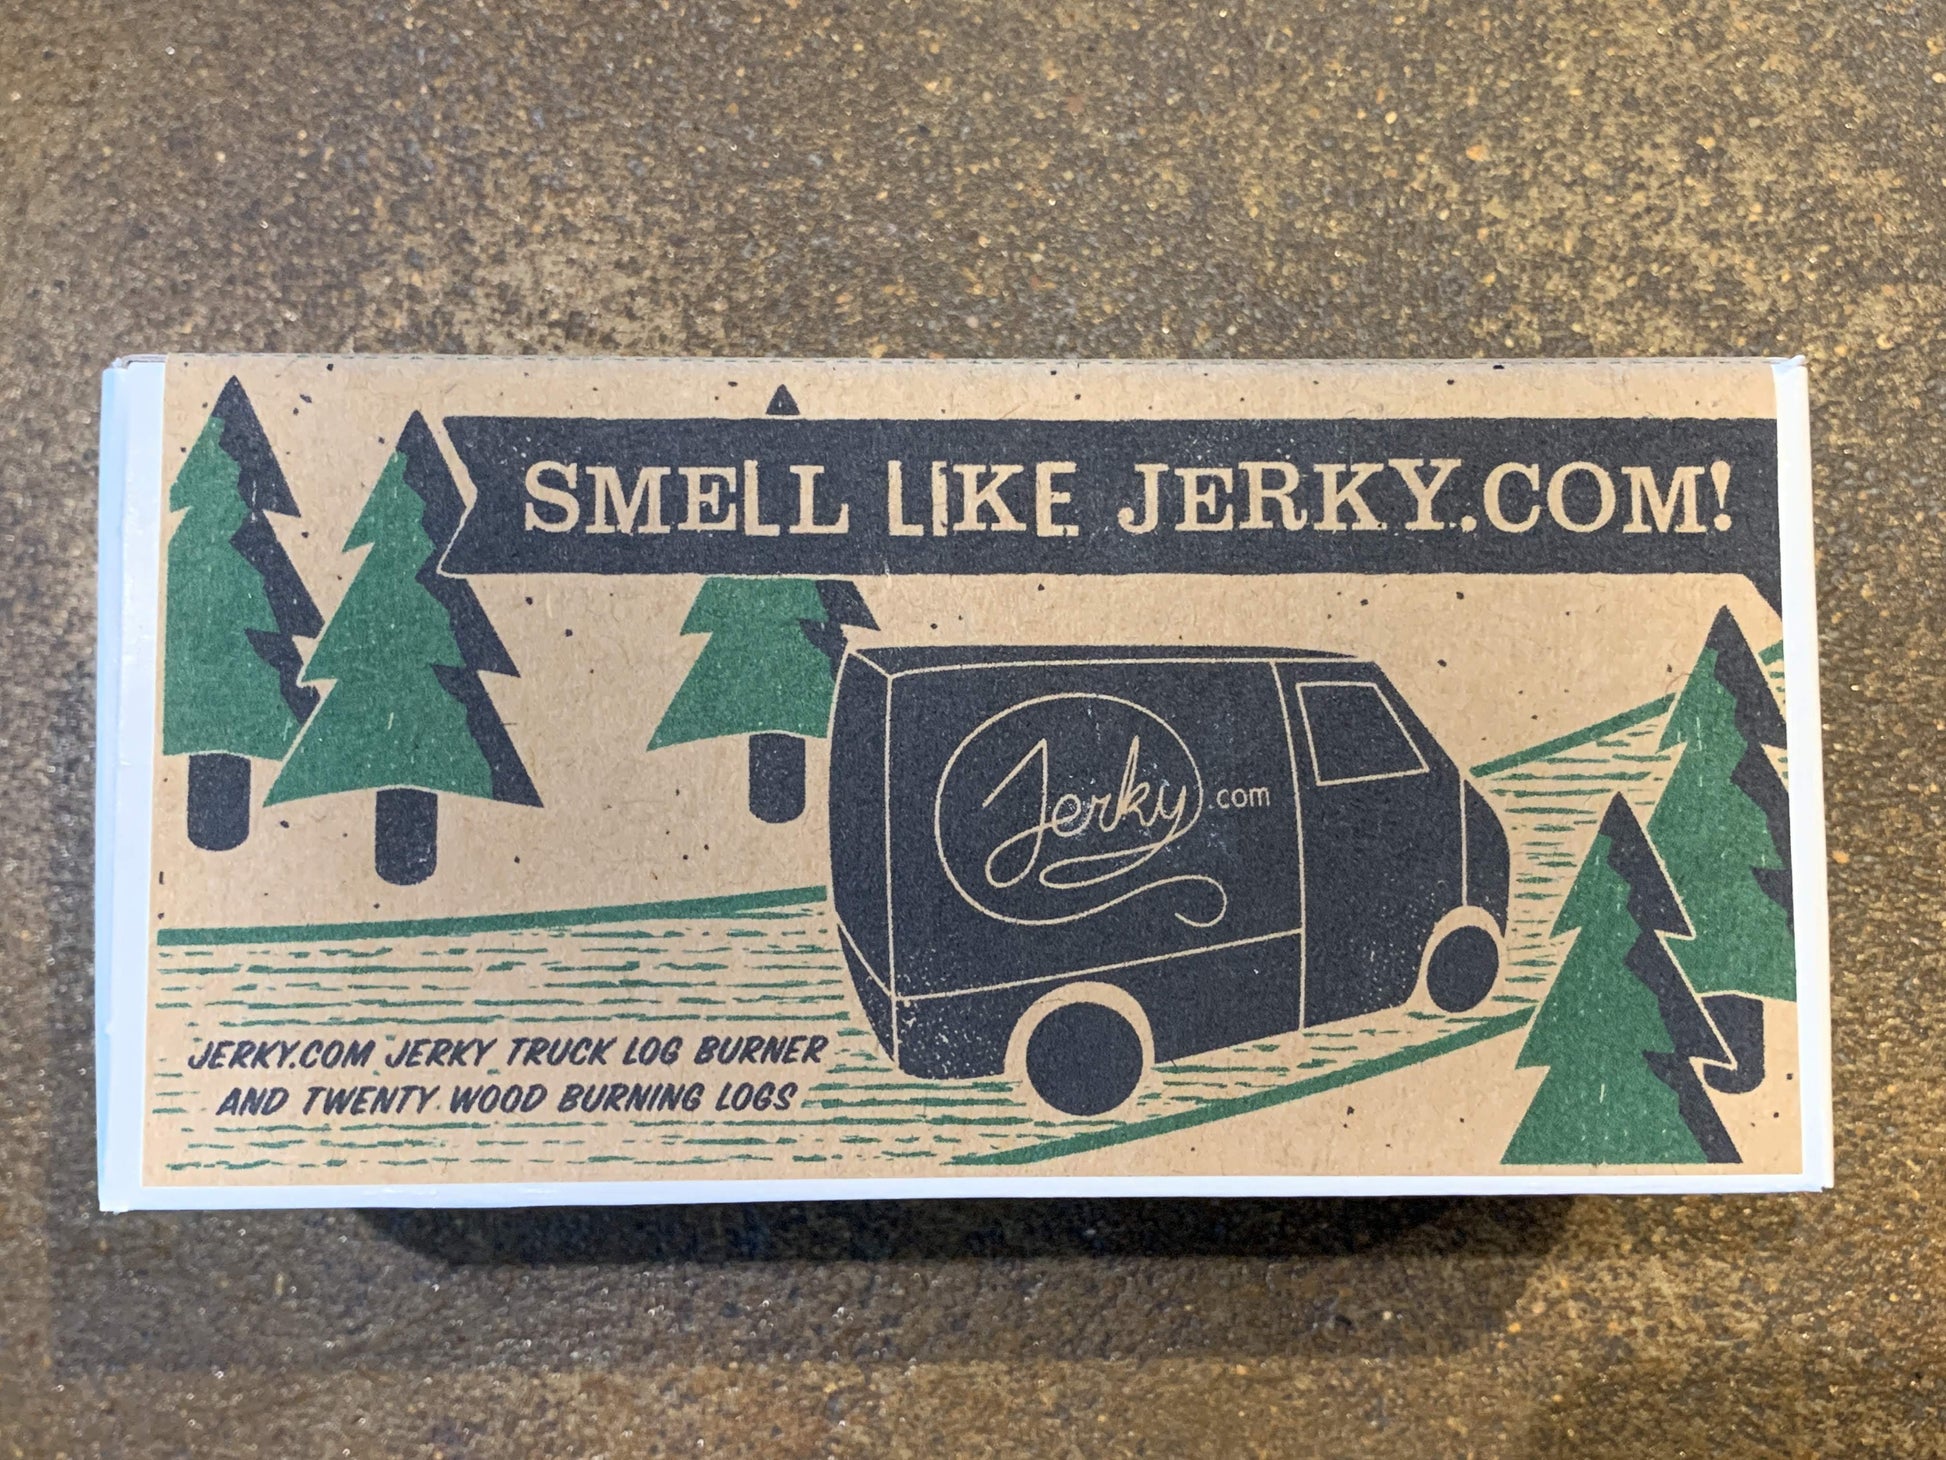 Wood Incense by Jerky.com